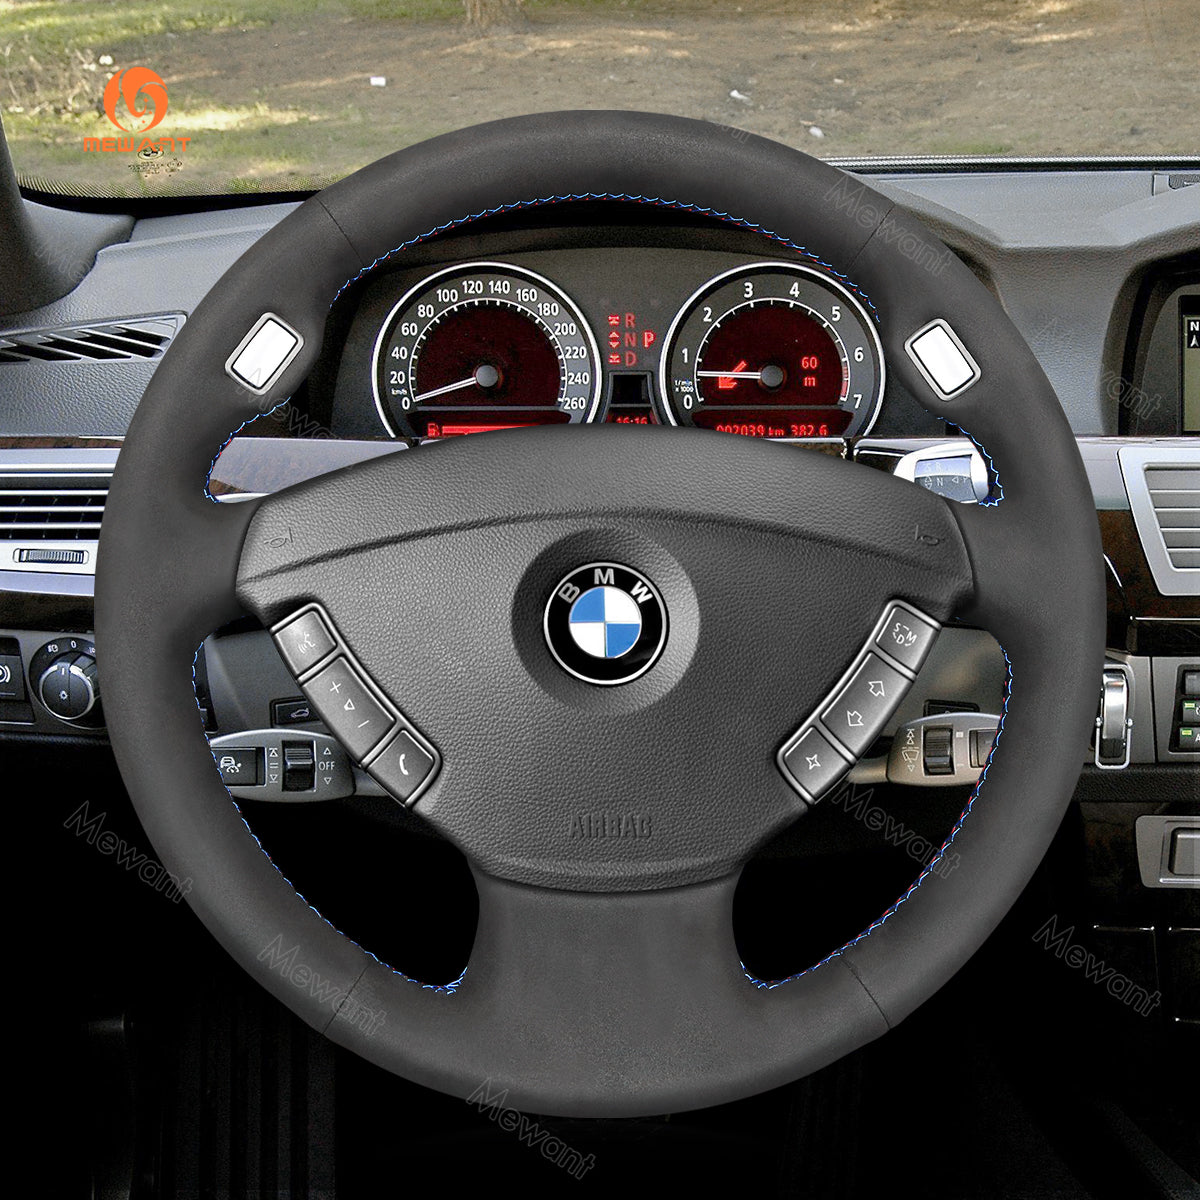 MEWANT Hand Stitch Car Steering Wheel Cover for BMW 7 Series (E65/E66) 2001-2008